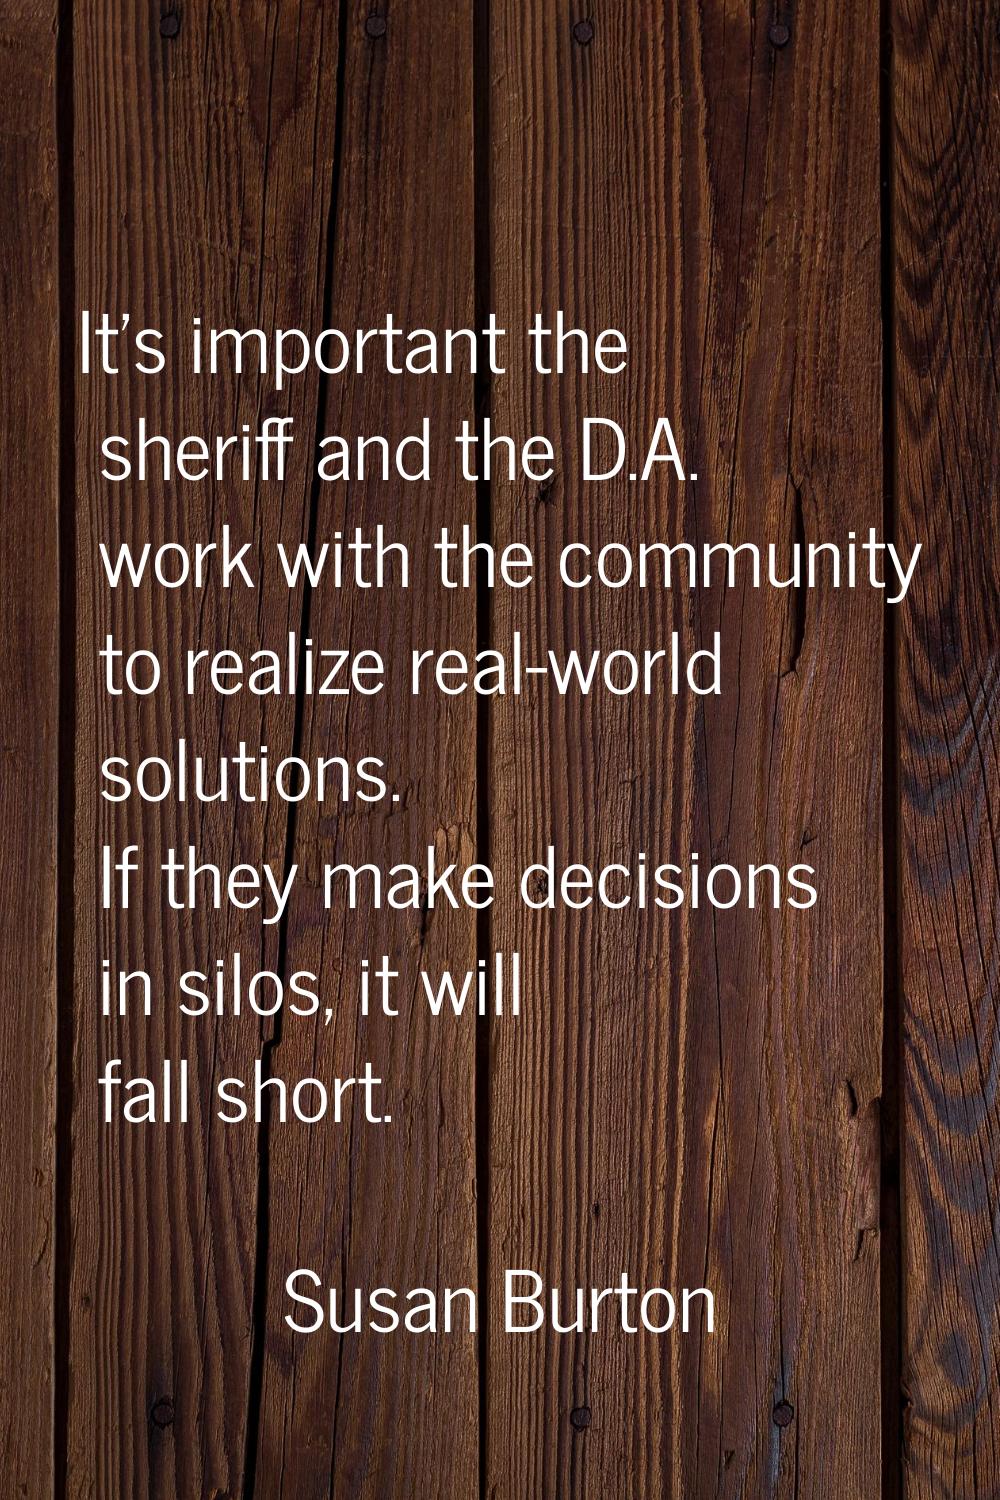 It's important the sheriff and the D.A. work with the community to realize real-world solutions. If